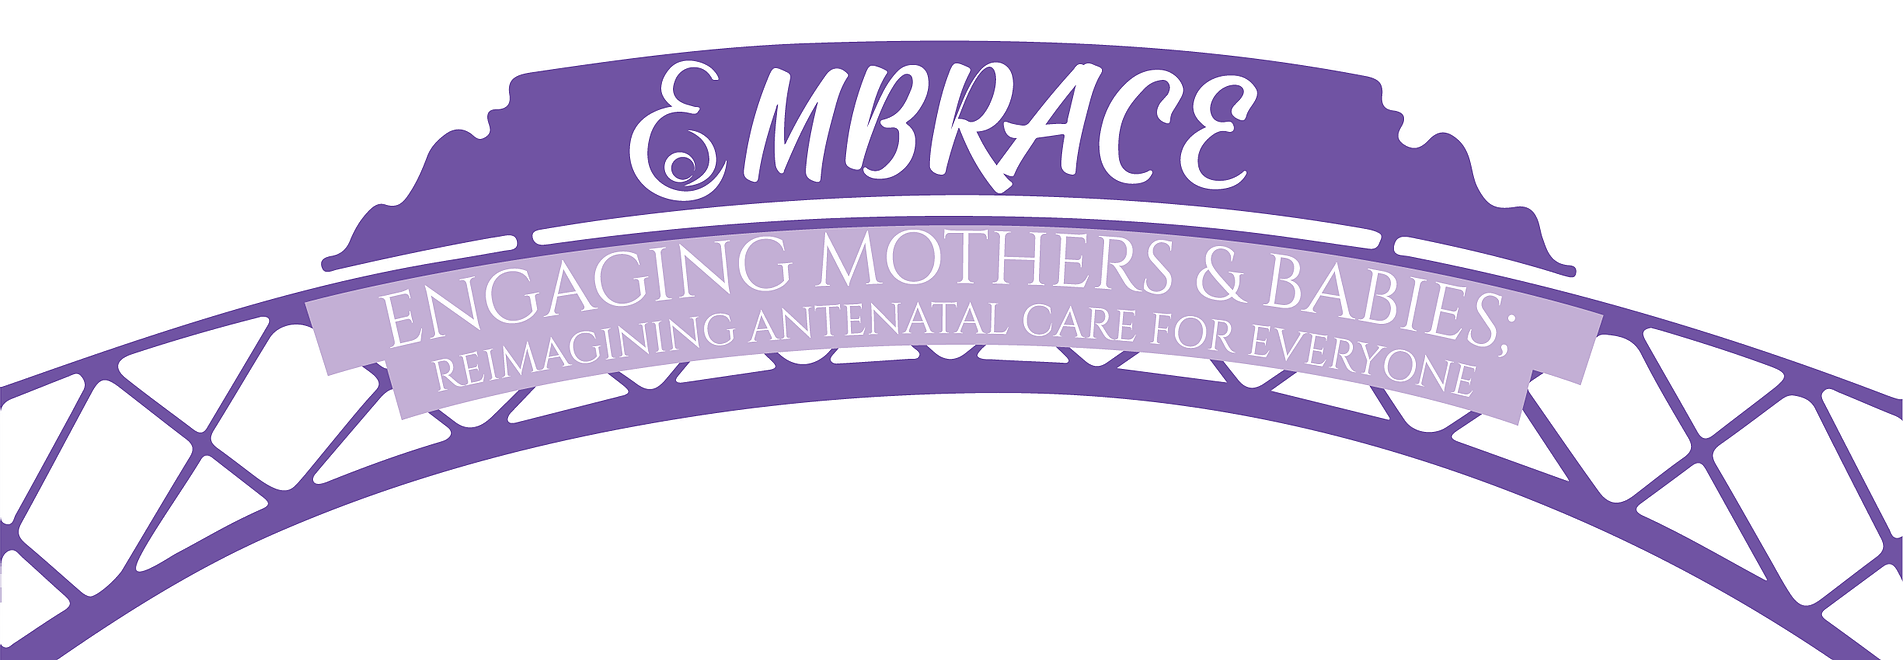 EMBRACE Study Logo: "Engaging Mothers & Babies; Reimagining Antenatal Care For Everyone"